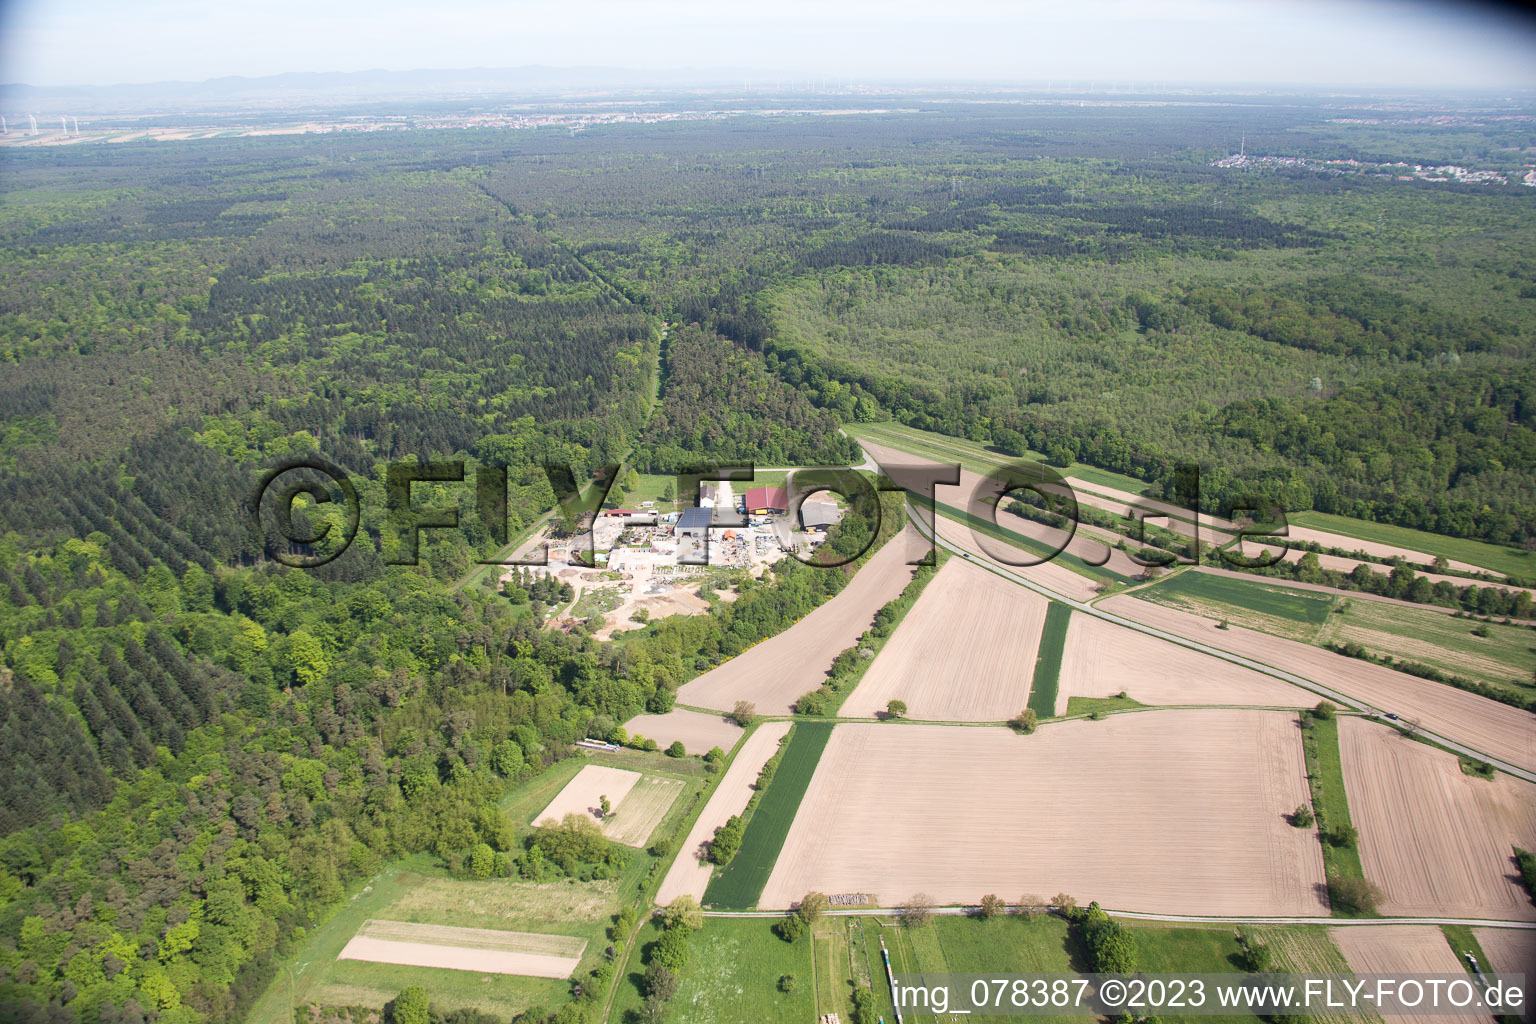 Bird's eye view of Palatinum landscape and garden design in Hagenbach in the state Rhineland-Palatinate, Germany